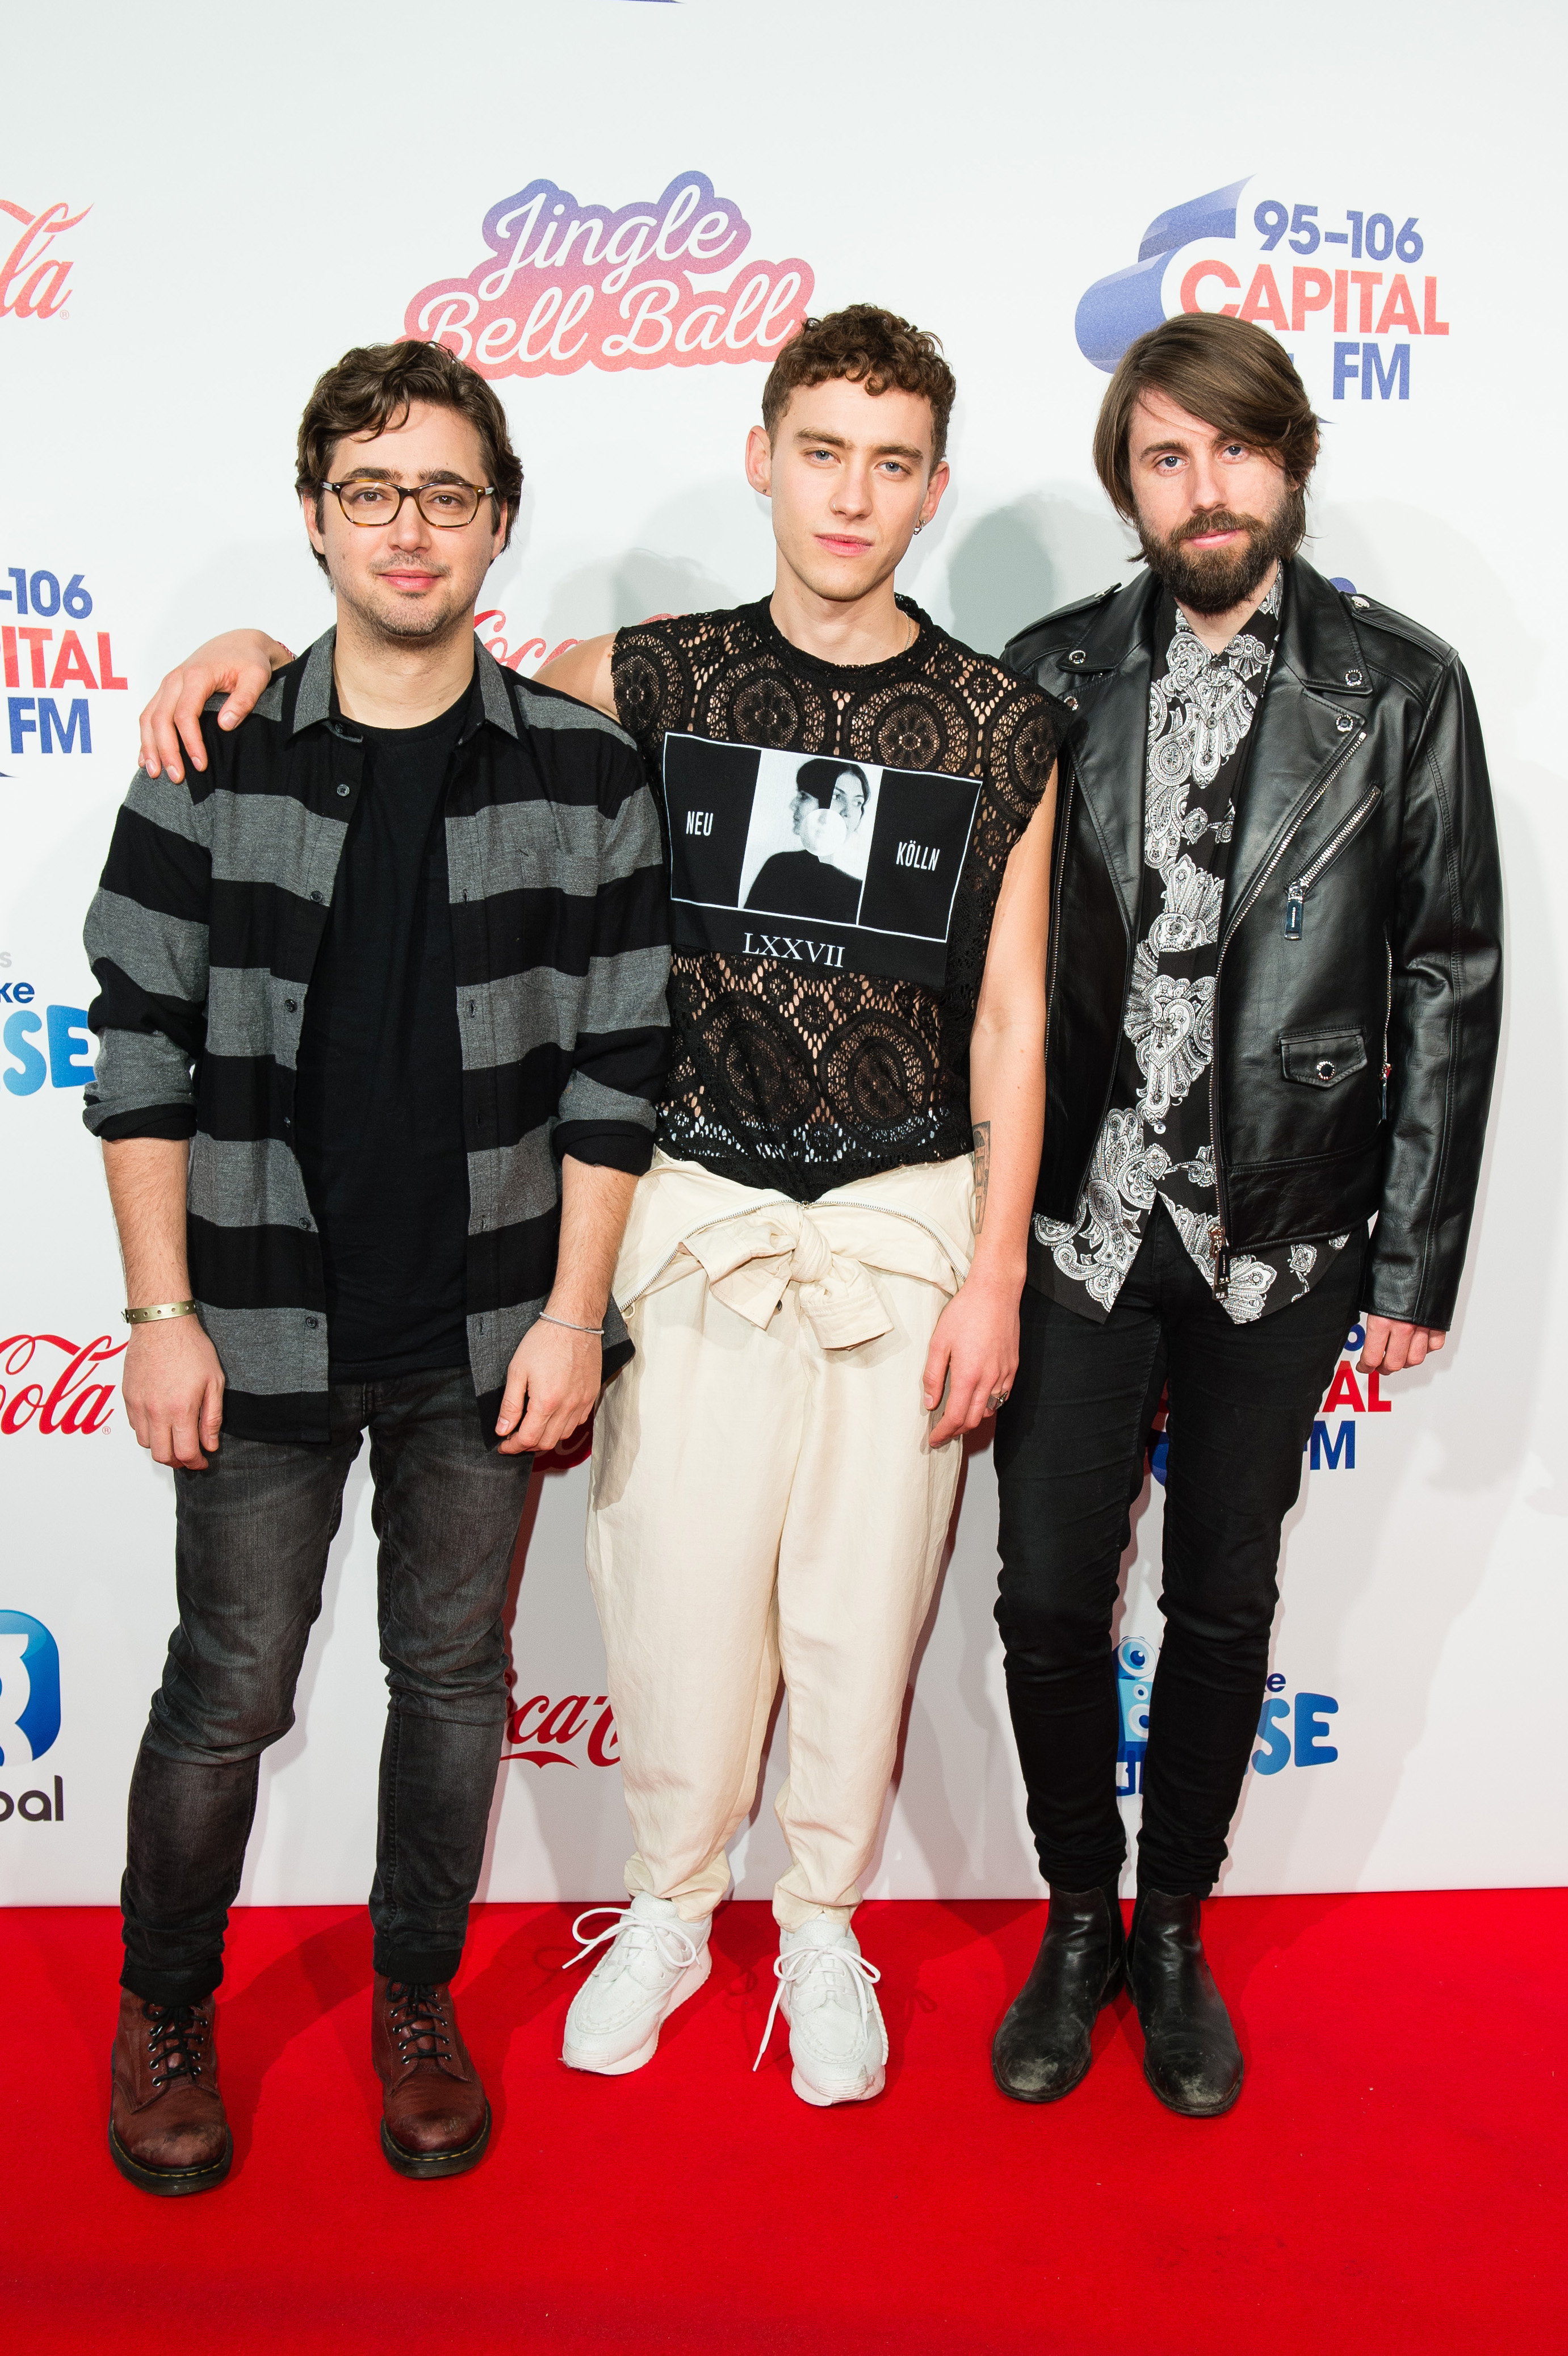 Years and Years Jingle Bell Ball 2016 Red Carpet